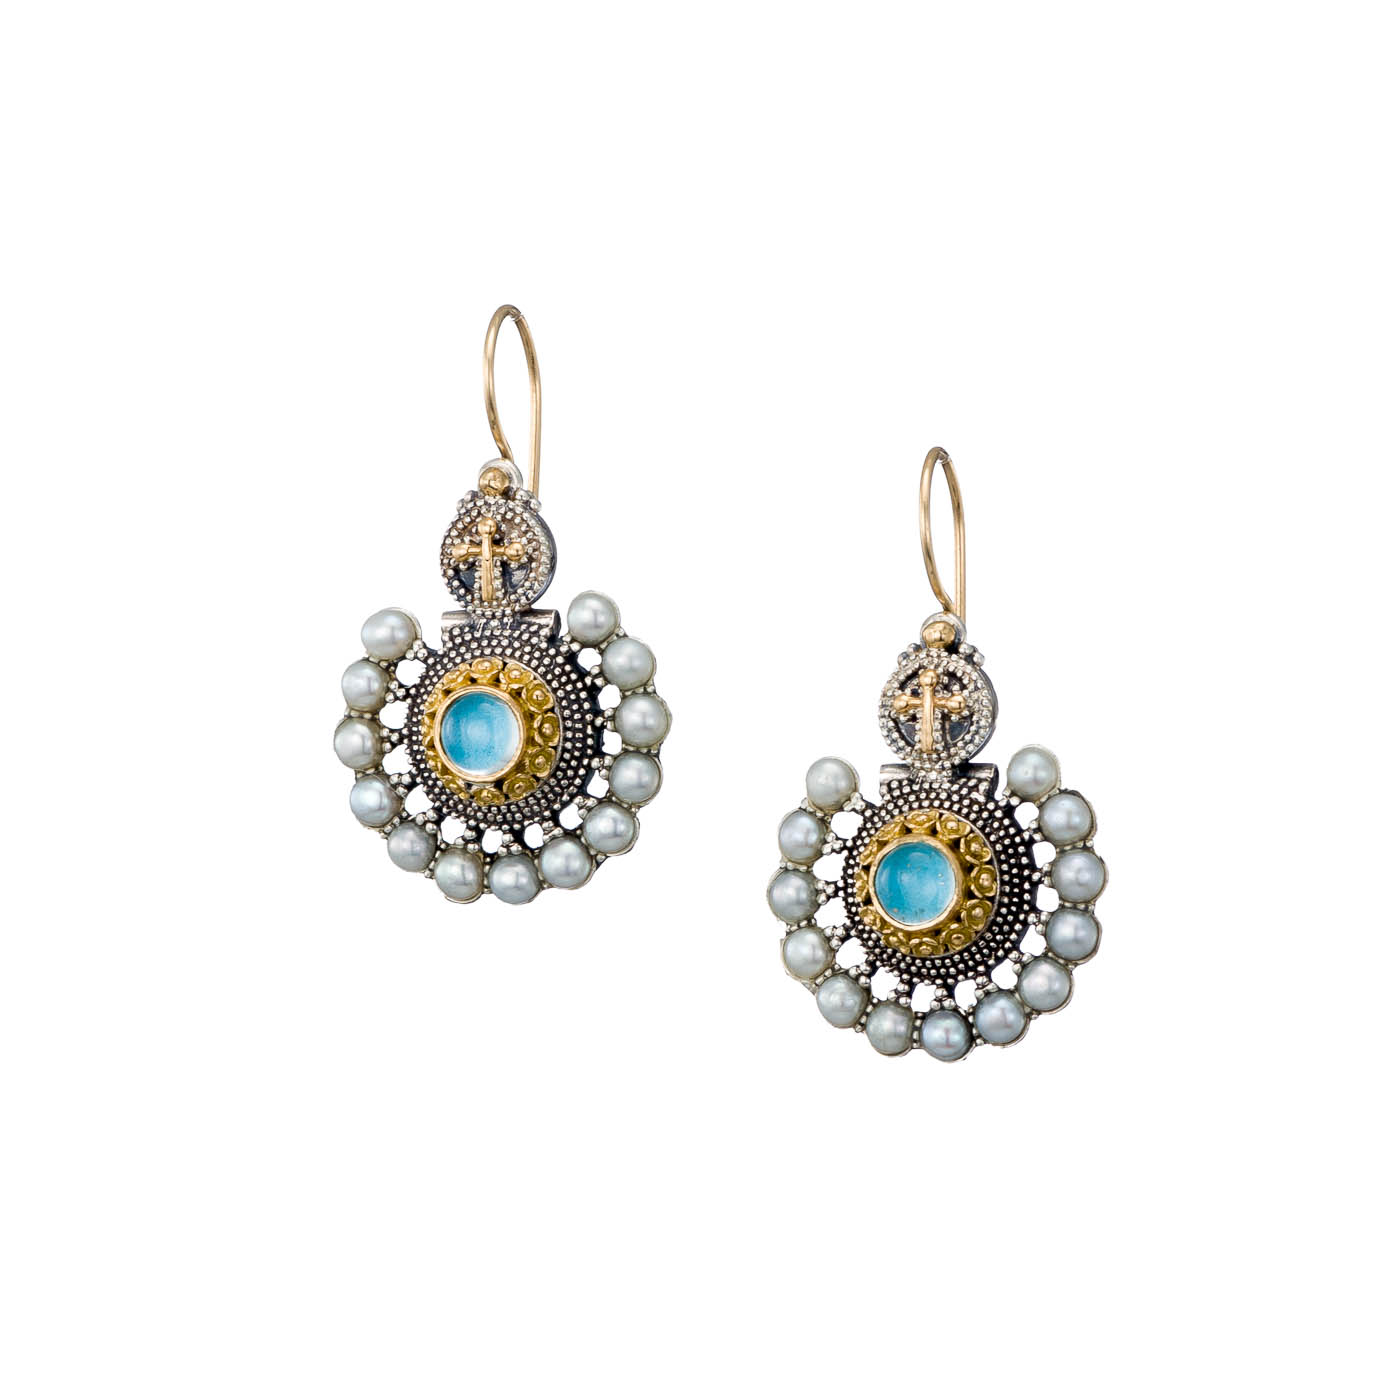 Athenian Flower Peacock Earrings in 18K Gold and Sterling Silver with Aquamarine